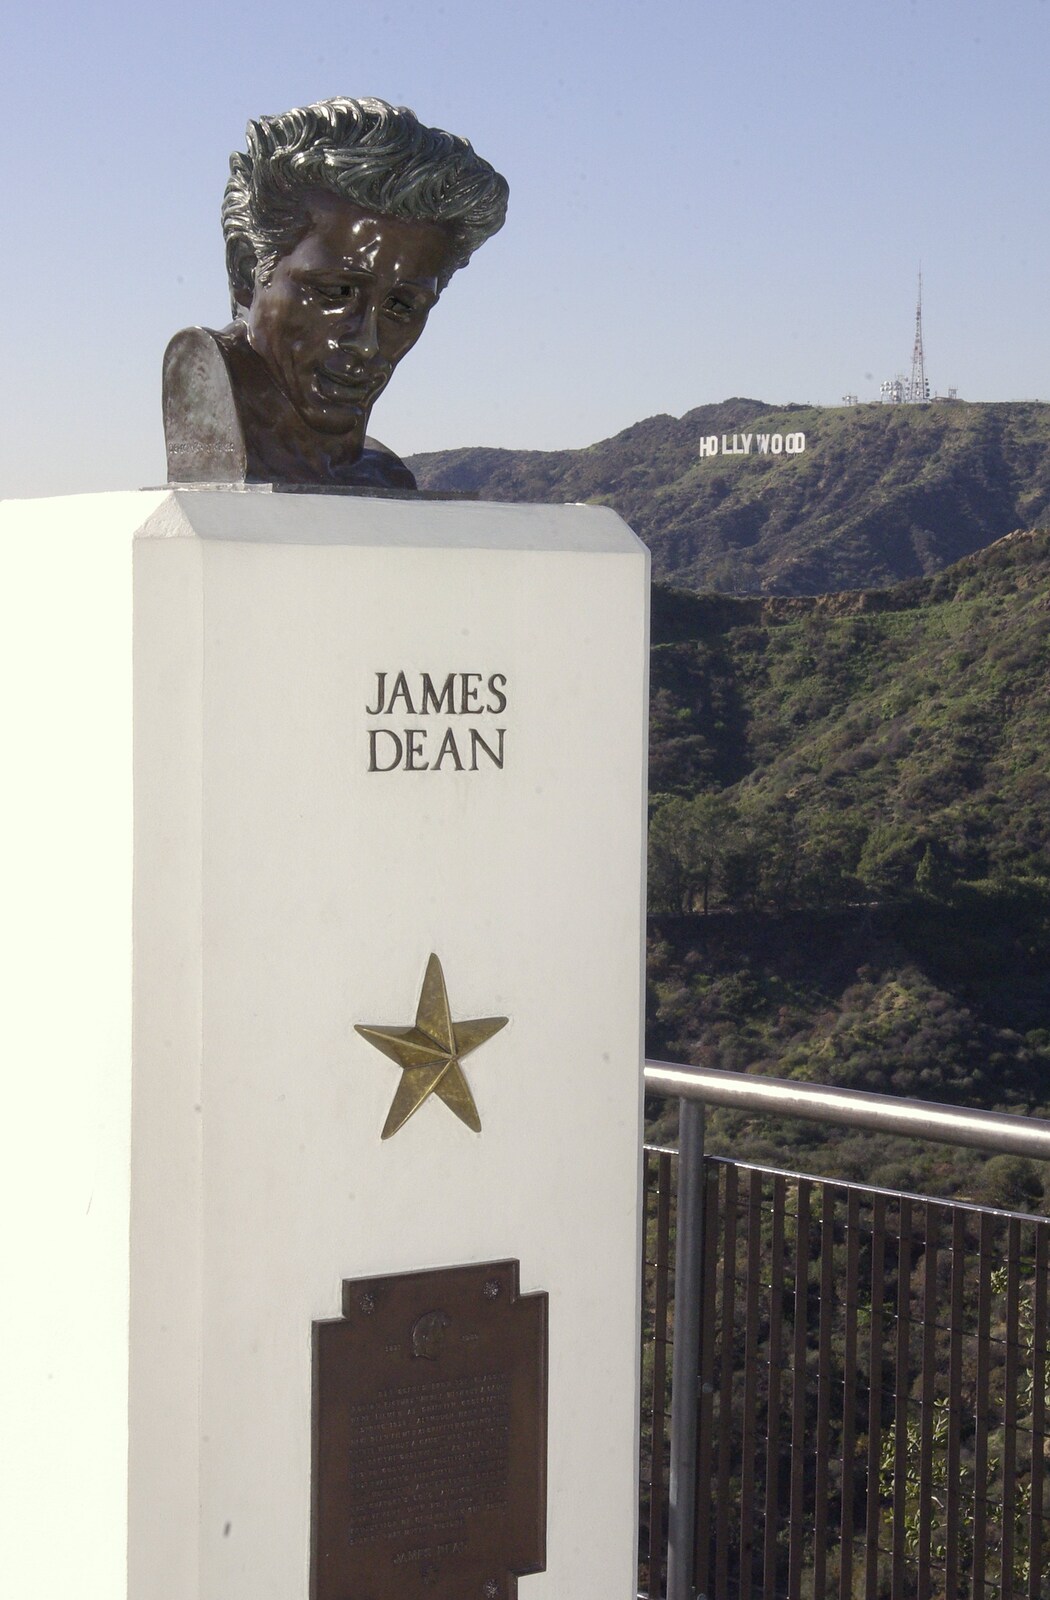 San Diego and Hollywood, California, US - 3rd March 2008: An odd-looking statue of James Dean